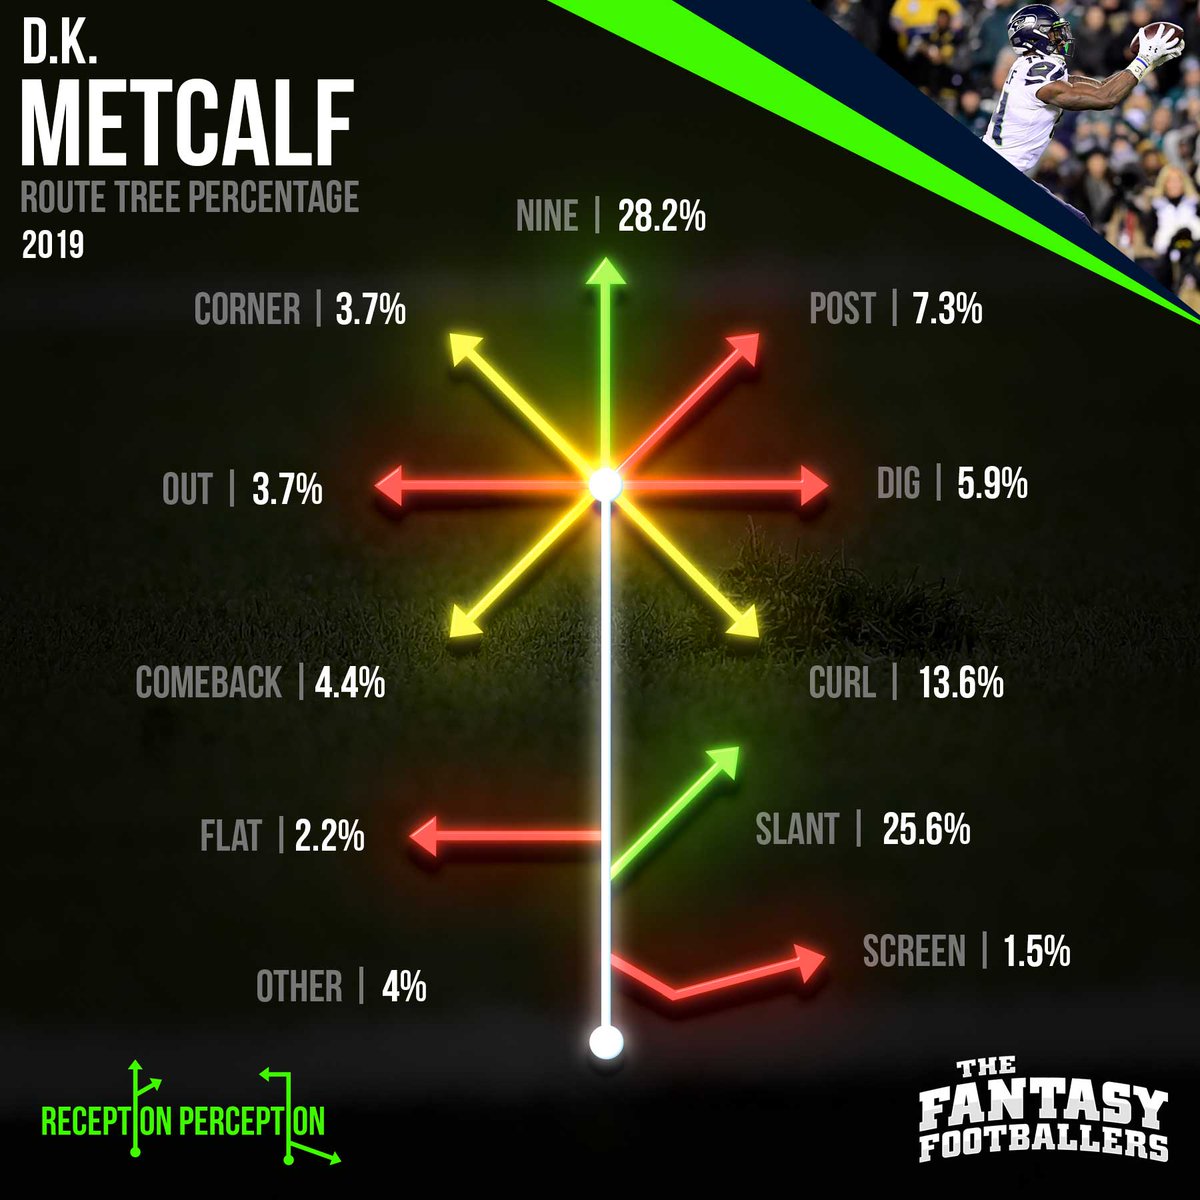 The Seahawks wisely simplified DK Metcalf's rookie year assignment.- Took 63% of his snaps at left WR, highest of any outside receiver sampled in 2019.- 53.2% of his charted routes were either a slant or nine route. #ReceptionPerception